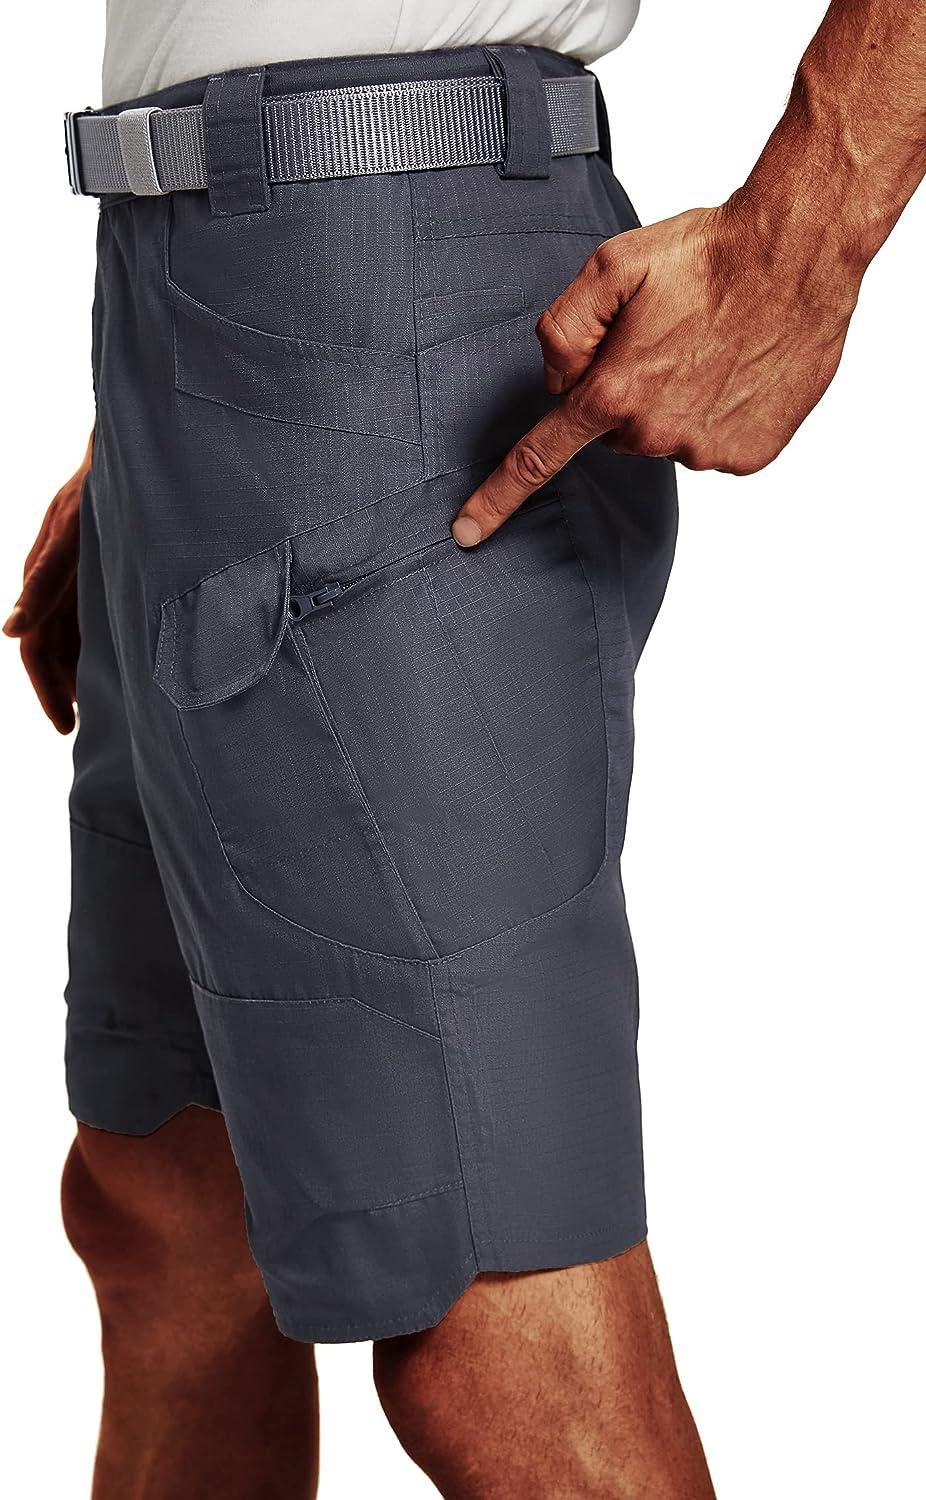 URBEST Tactical Shorts for Men Waterproof Breathable Quick Dry